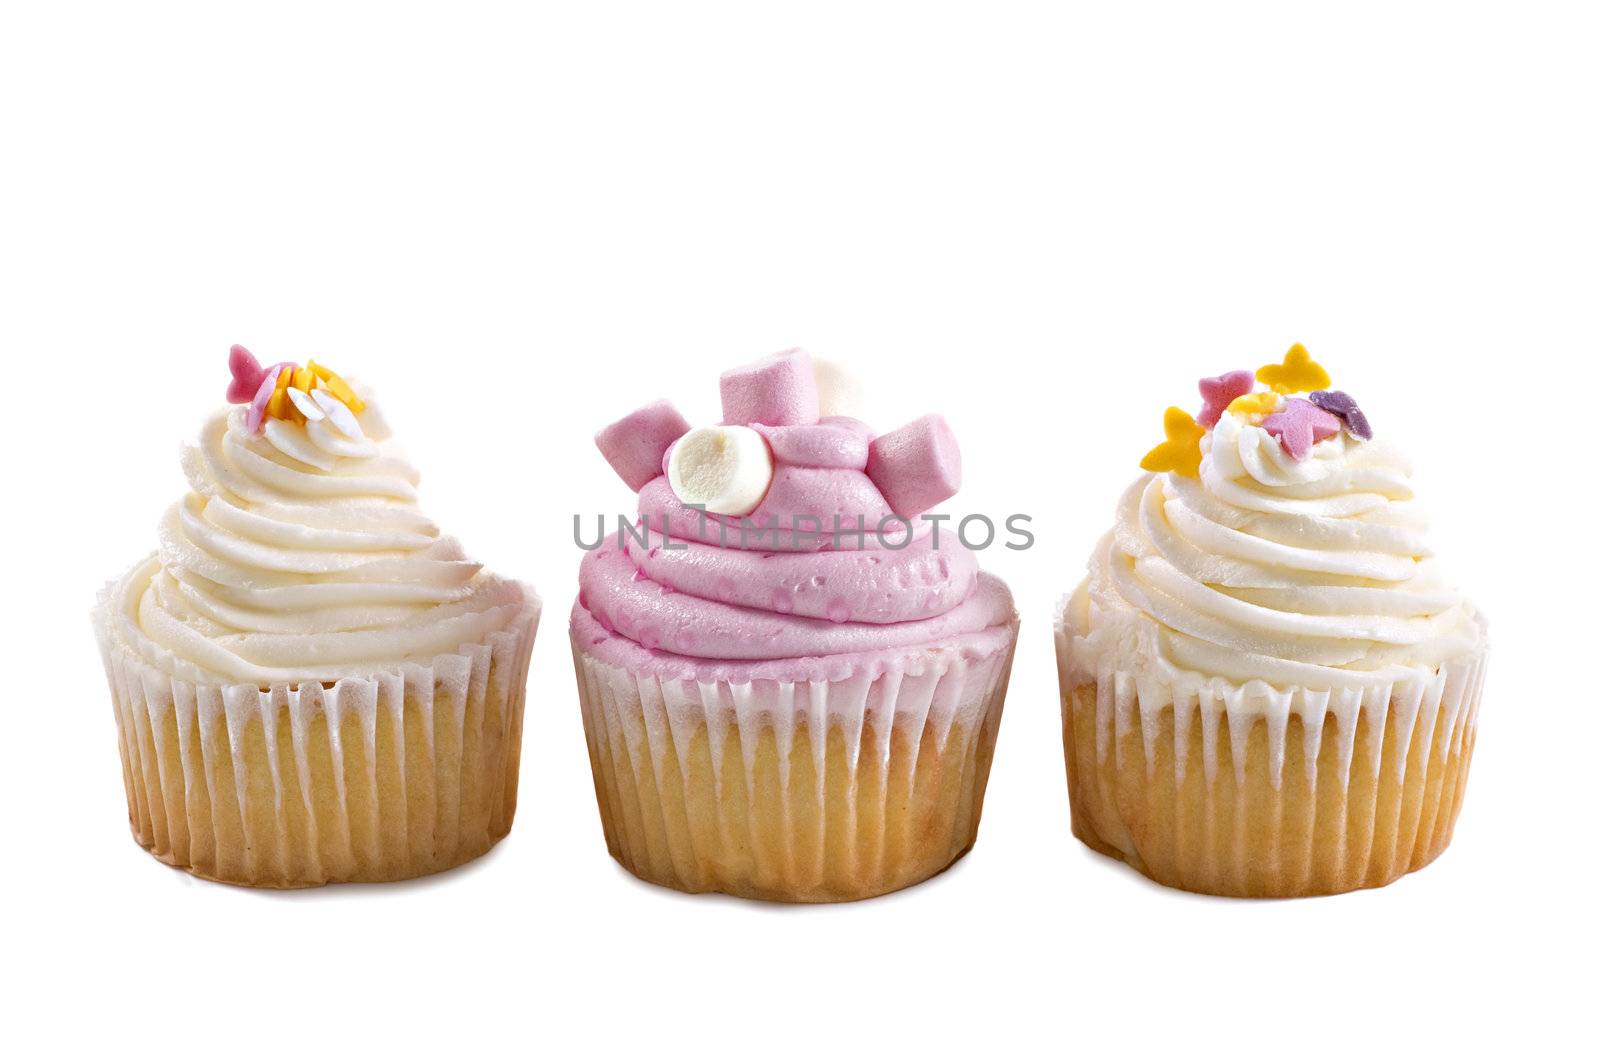 Pink and cream cupcakes against a white background with space for text by tish1